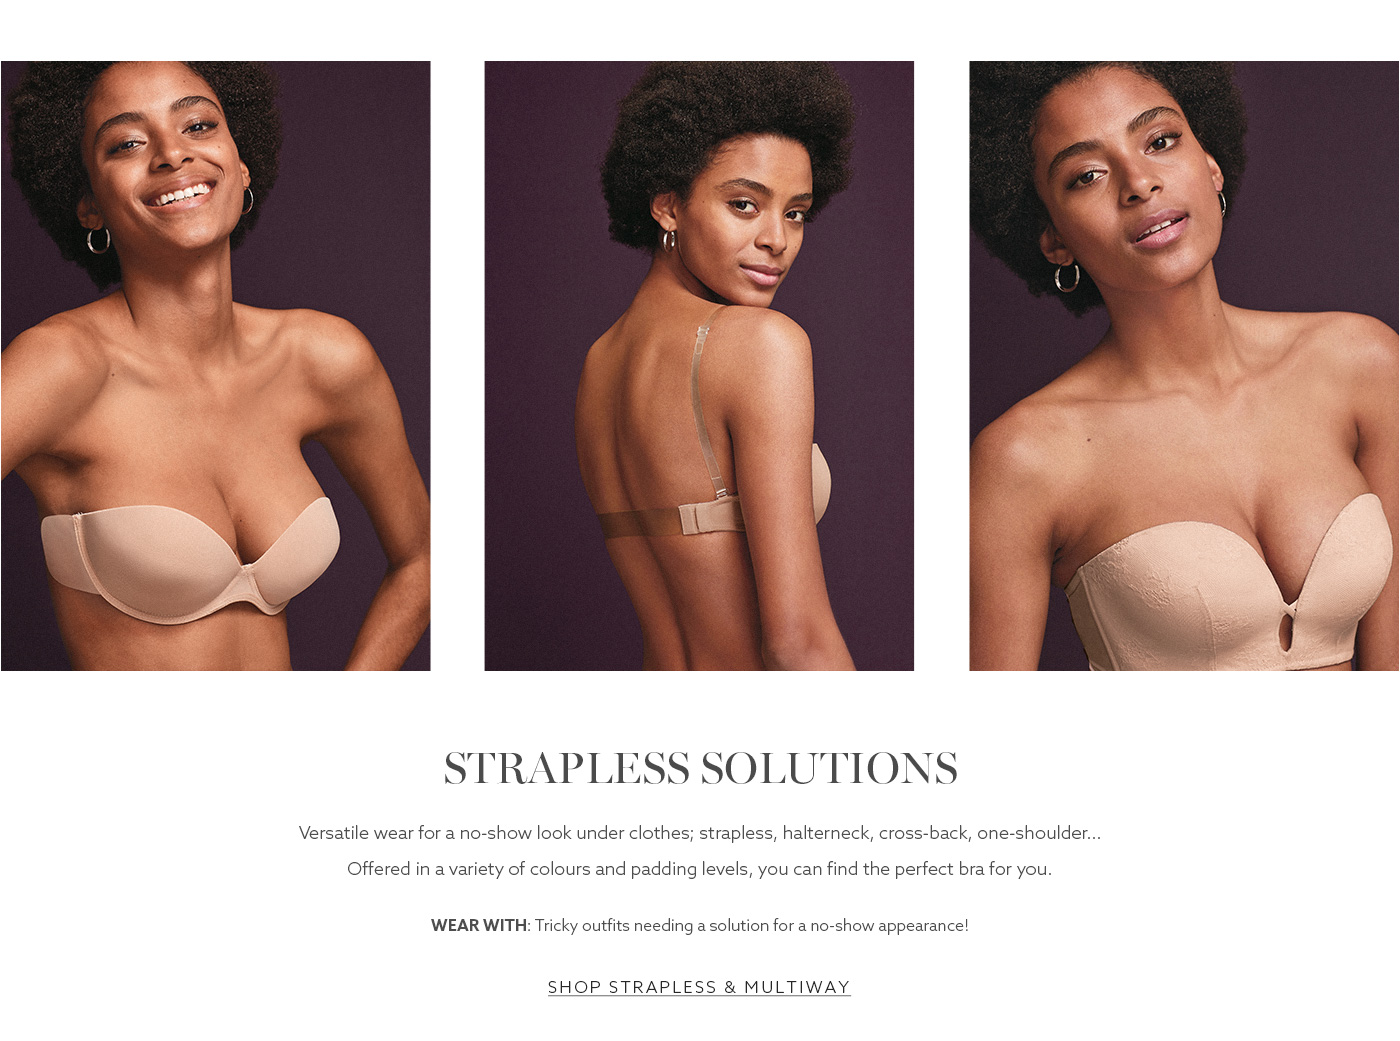 Shop strapless & multiway